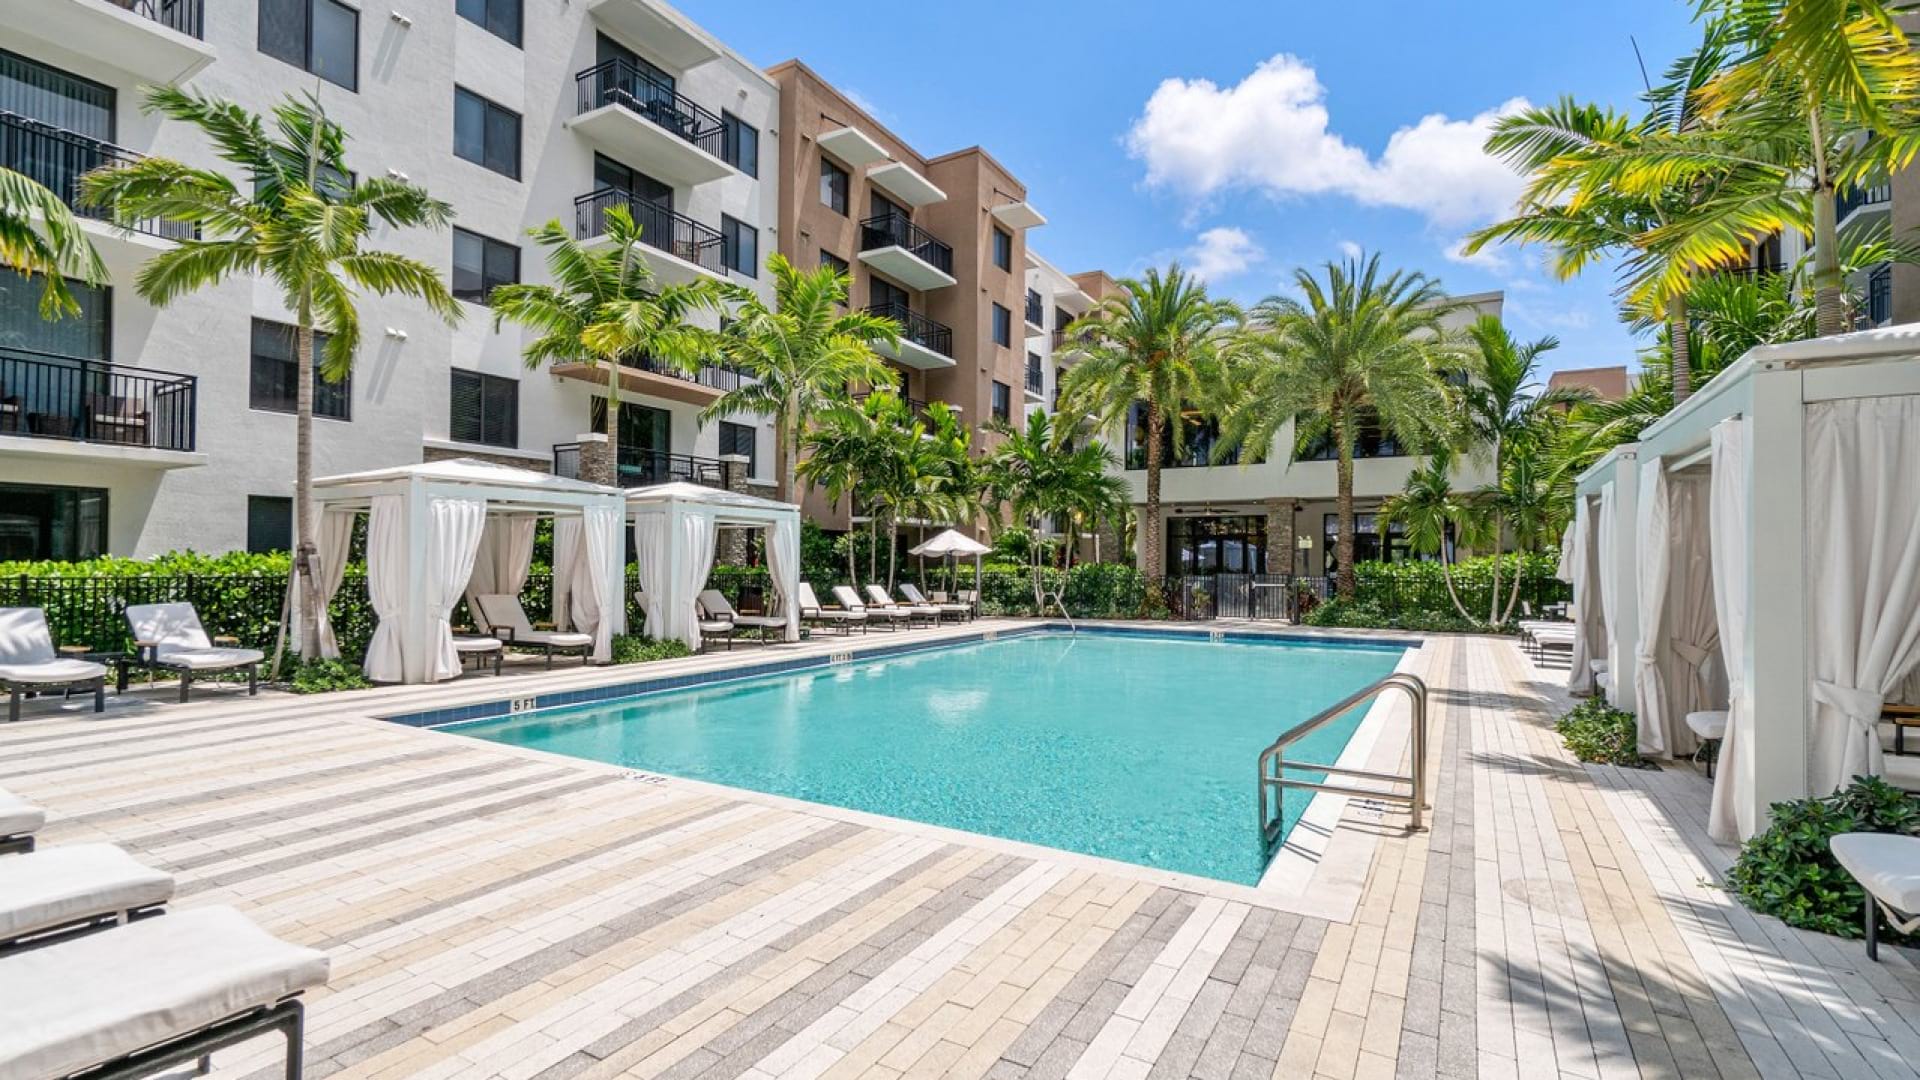 Heated, Resort-Style Pool and Sun Deck at Our Luxury Apartments in Deerfield Beach